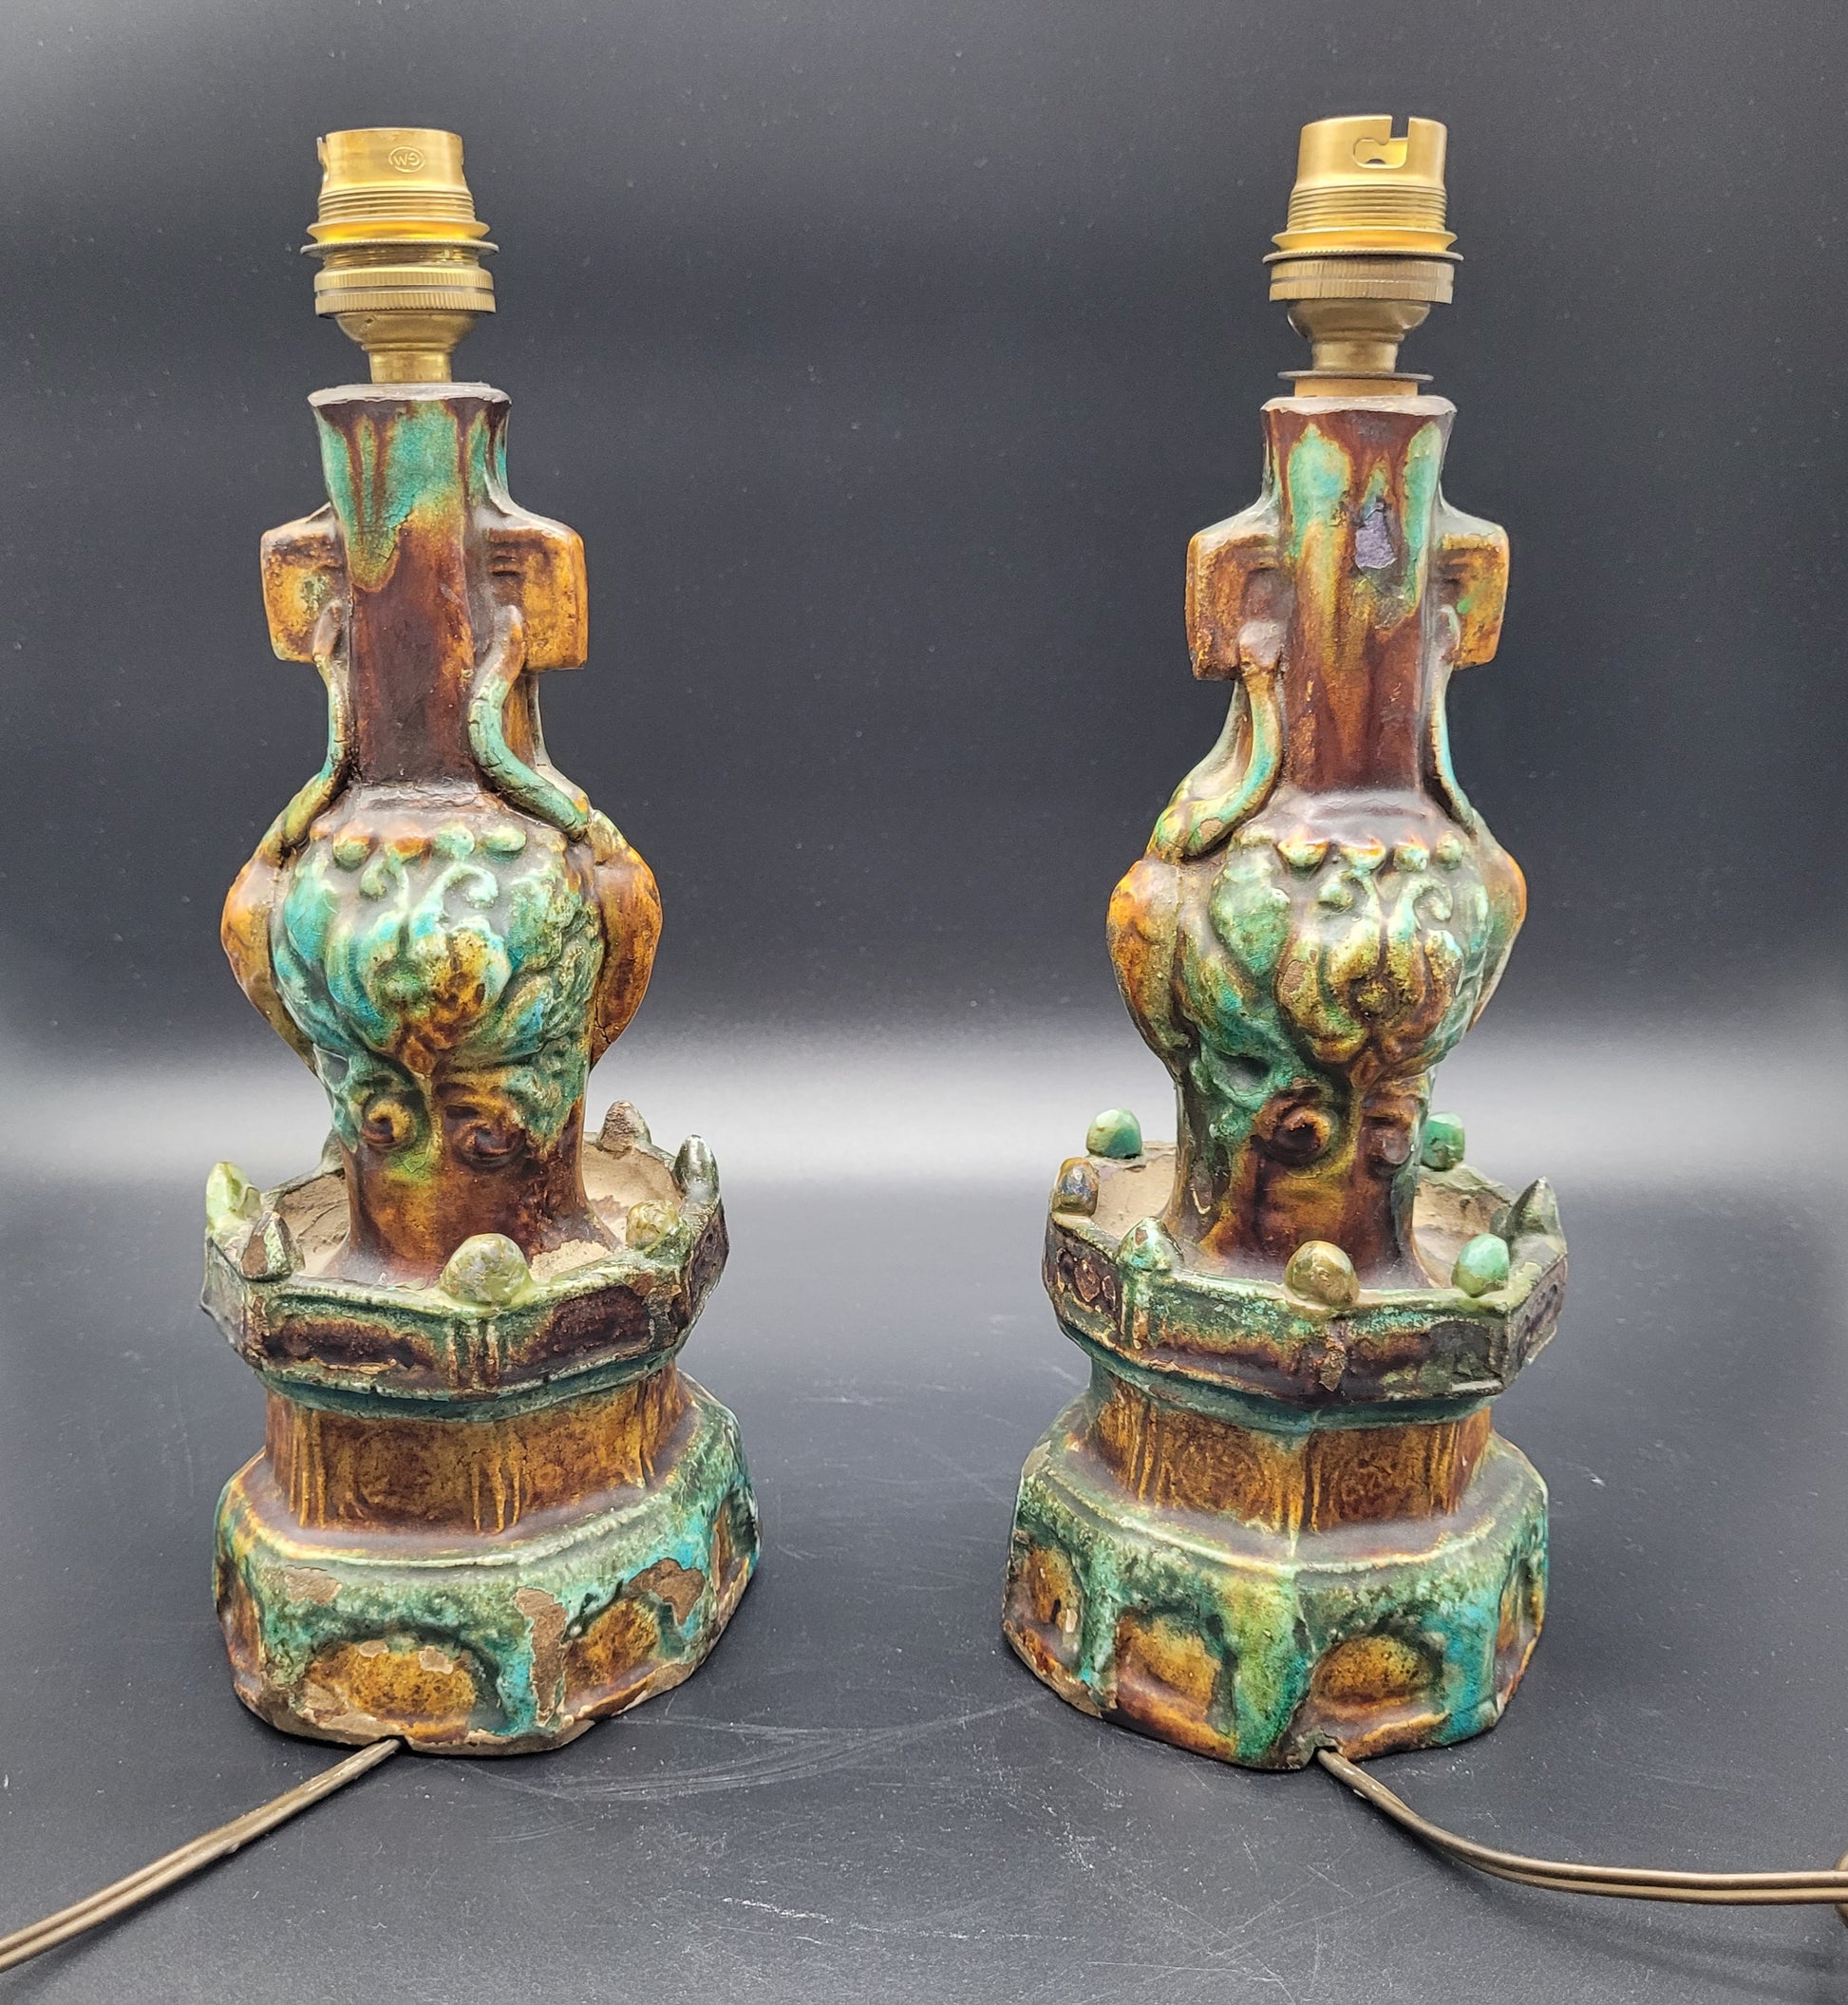 Peter Combs Asian Art Chinese Ming Dynasty Pottery Candle Sticks 16th / 17th Century